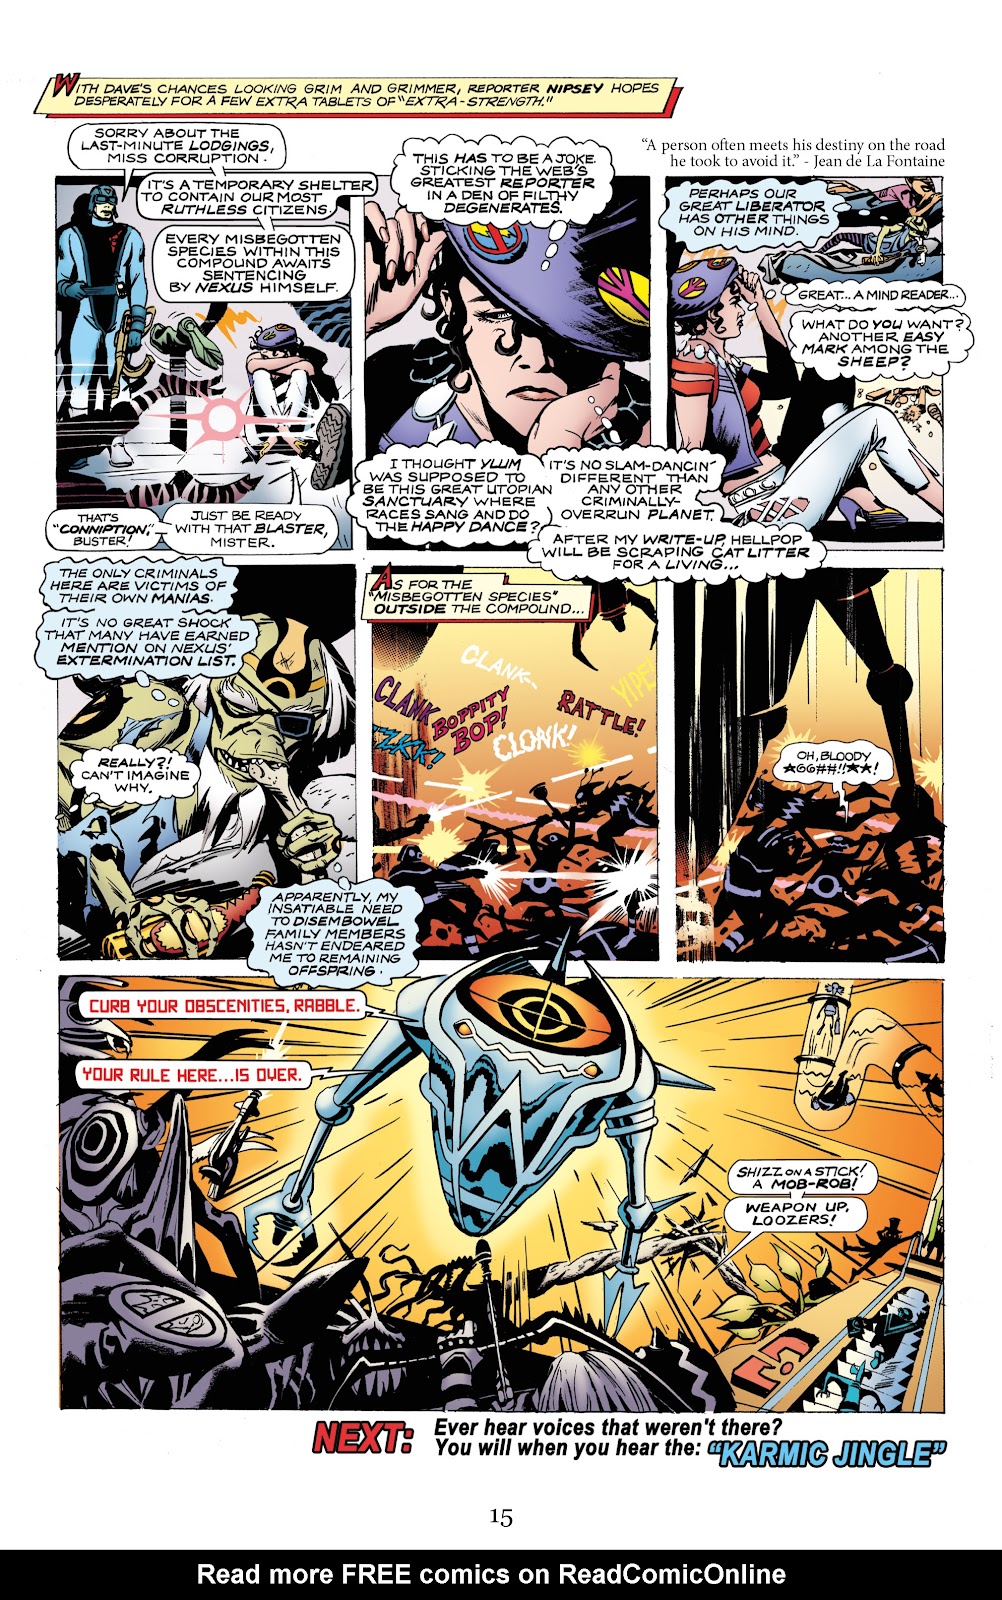 Nexus Newspaper Strips Vol 2: The Battle For Thuneworld issue 1 - Page 17